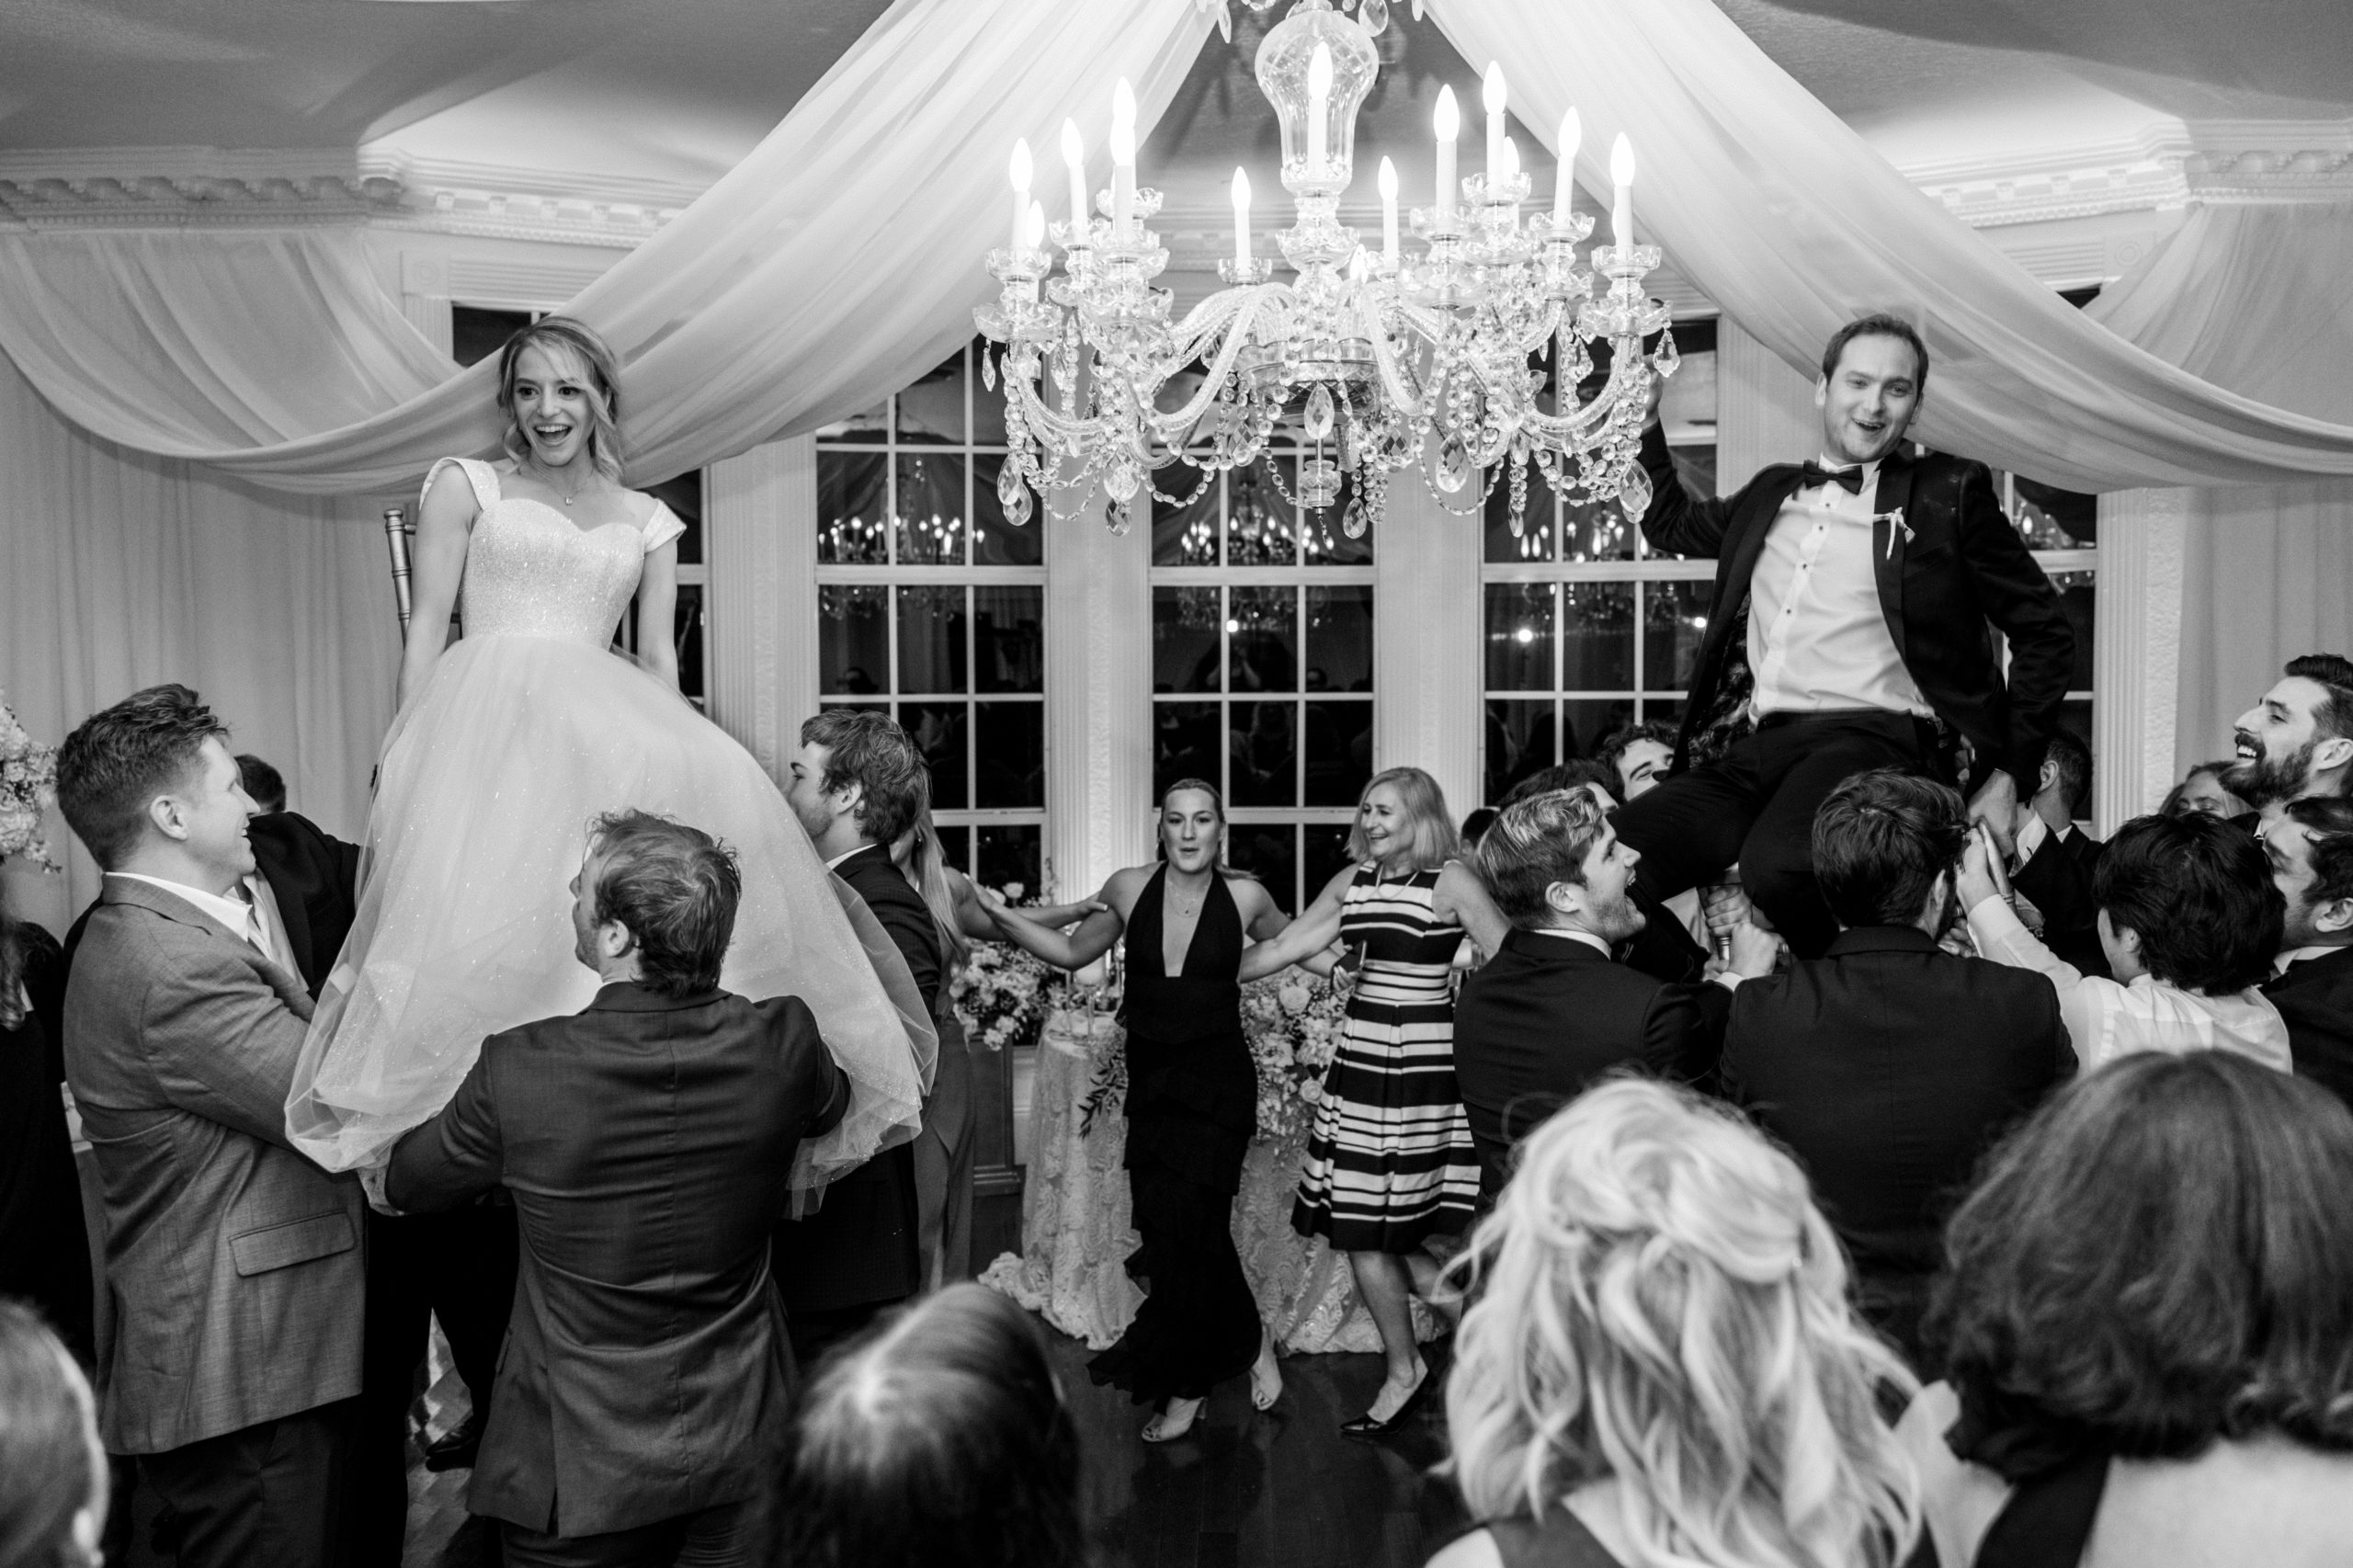 Bride and groom sit in chairs and are hoisted up on dance floor, known as the Hora, a traditional Jewish wedding tradition for Luxmore Grande Wedding